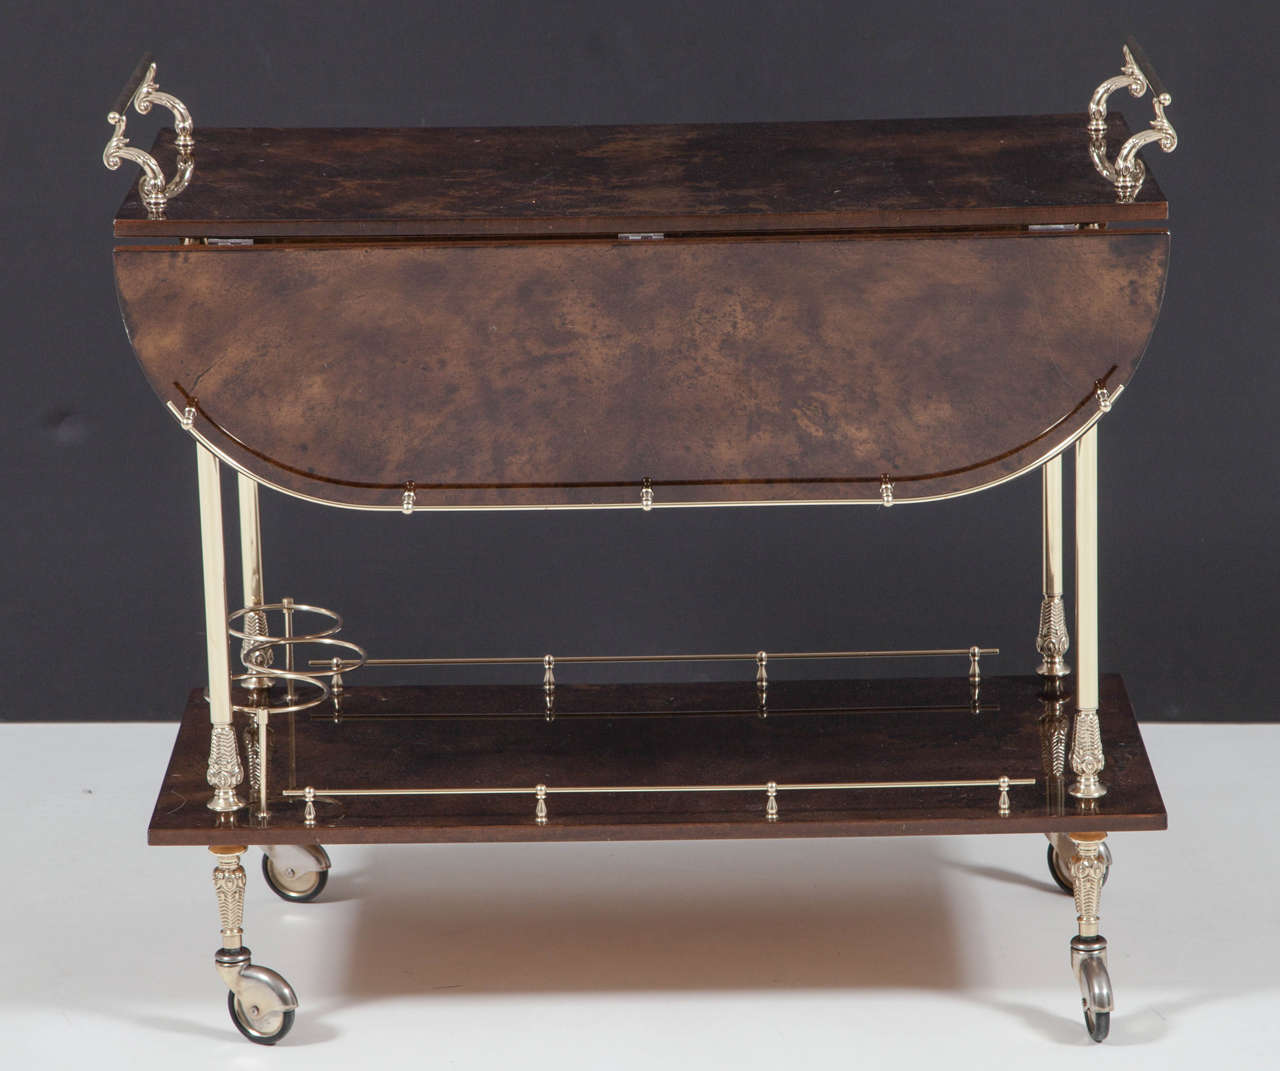 Beautiful goatskin parchment bar cart with brass details by Aldo Tura, circa 1950, Italy. Excellent condition. 
The bar cart is 27 inches high and with the handles it is 29.5 inches high.